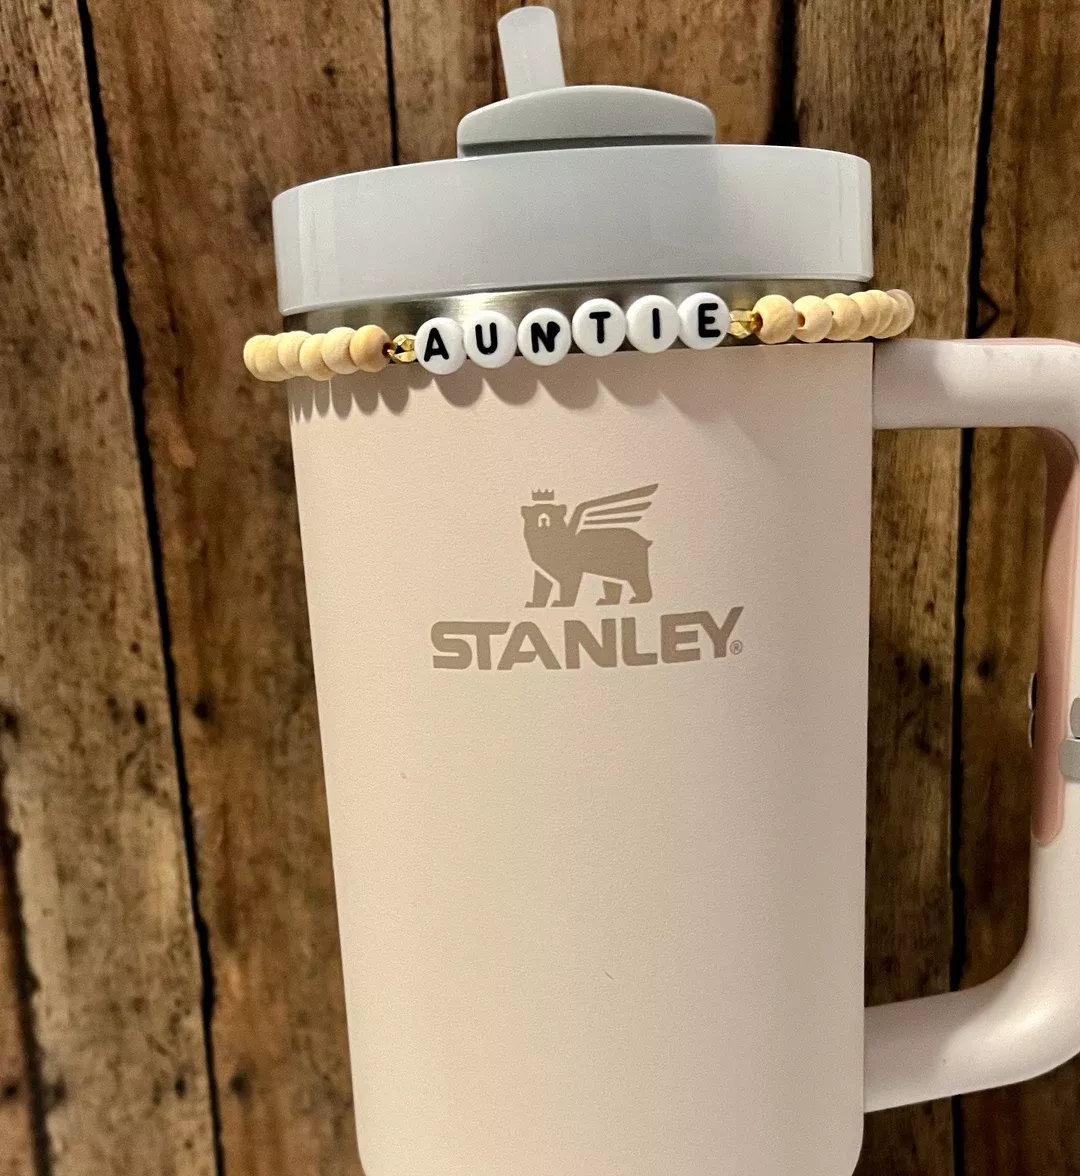 Stanley Tumbler Charm Stanley Accessory Water Bottle Charm Cup Charm Stanley  Cup Charm Tumbler Handle Charm Drink Accessory Stanley Bracelet 